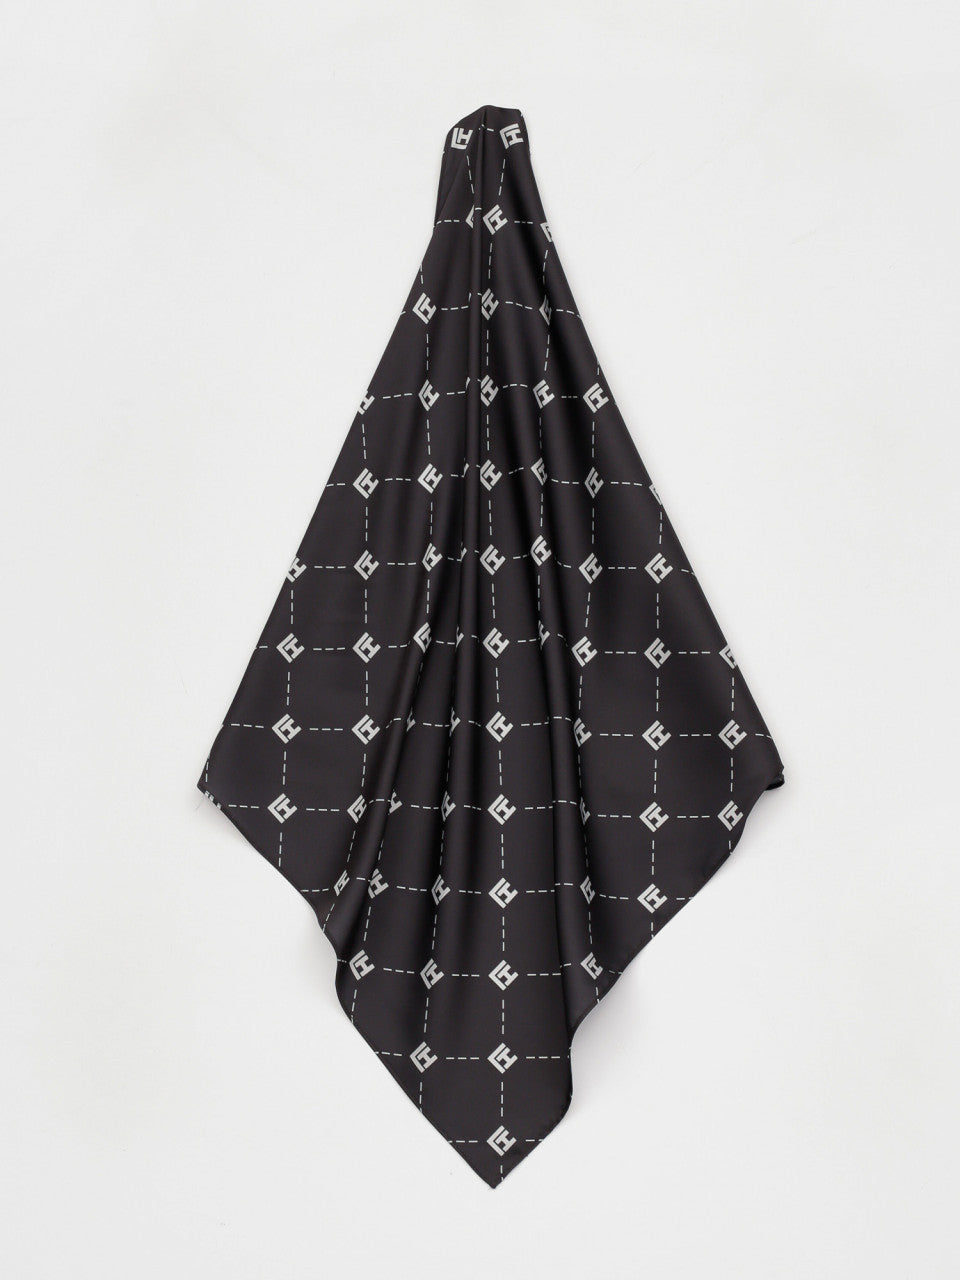 LH MONOGRAM BANDANA - BLACK - EXCLUSIVE Bandana / scarf from LOCAL HEROES - Just €22! SHOP NOW AT IAMINHATELOVE BOTH IN STORE FOR CYPRUS AND ONLINE WORLDWIDE @ IAMINHATELOVE.COM